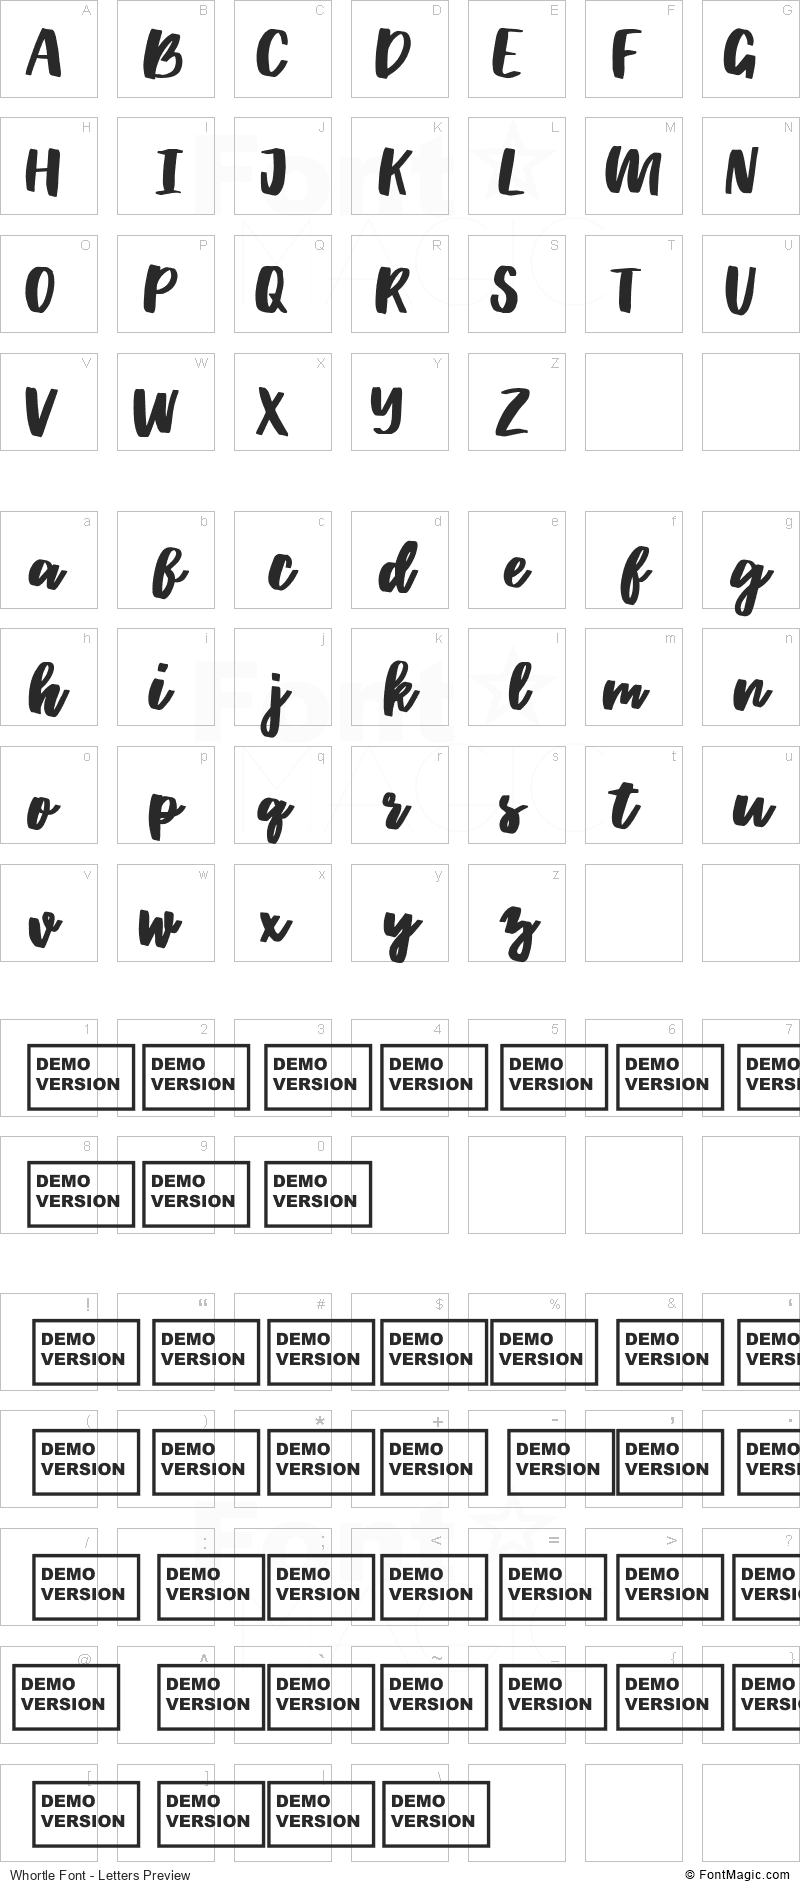 Whortle Font - All Latters Preview Chart